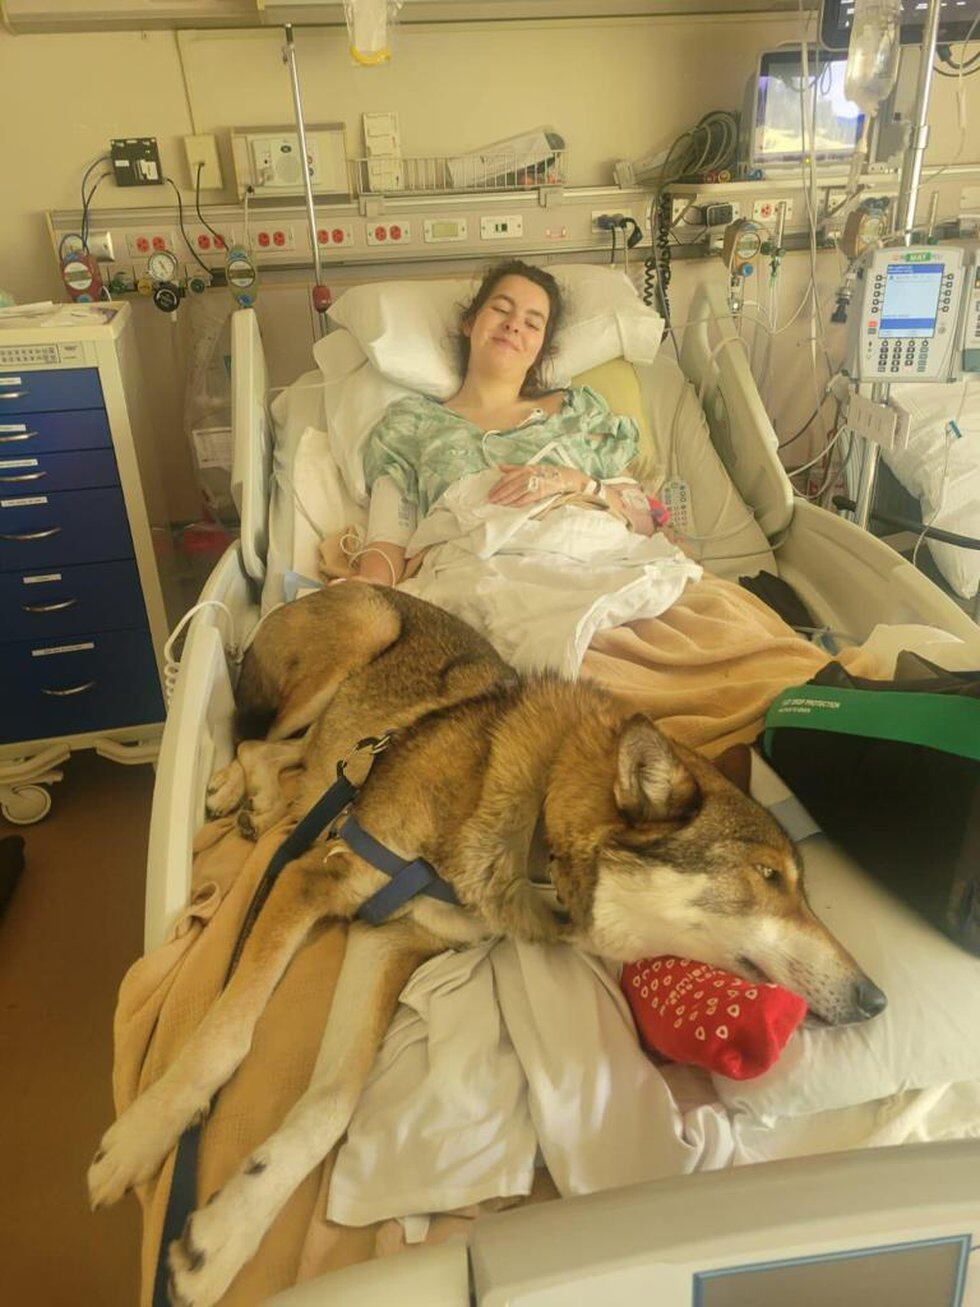 Amelia Dean with the dog she was walking in Custer State Park when she was attacked by a bison.